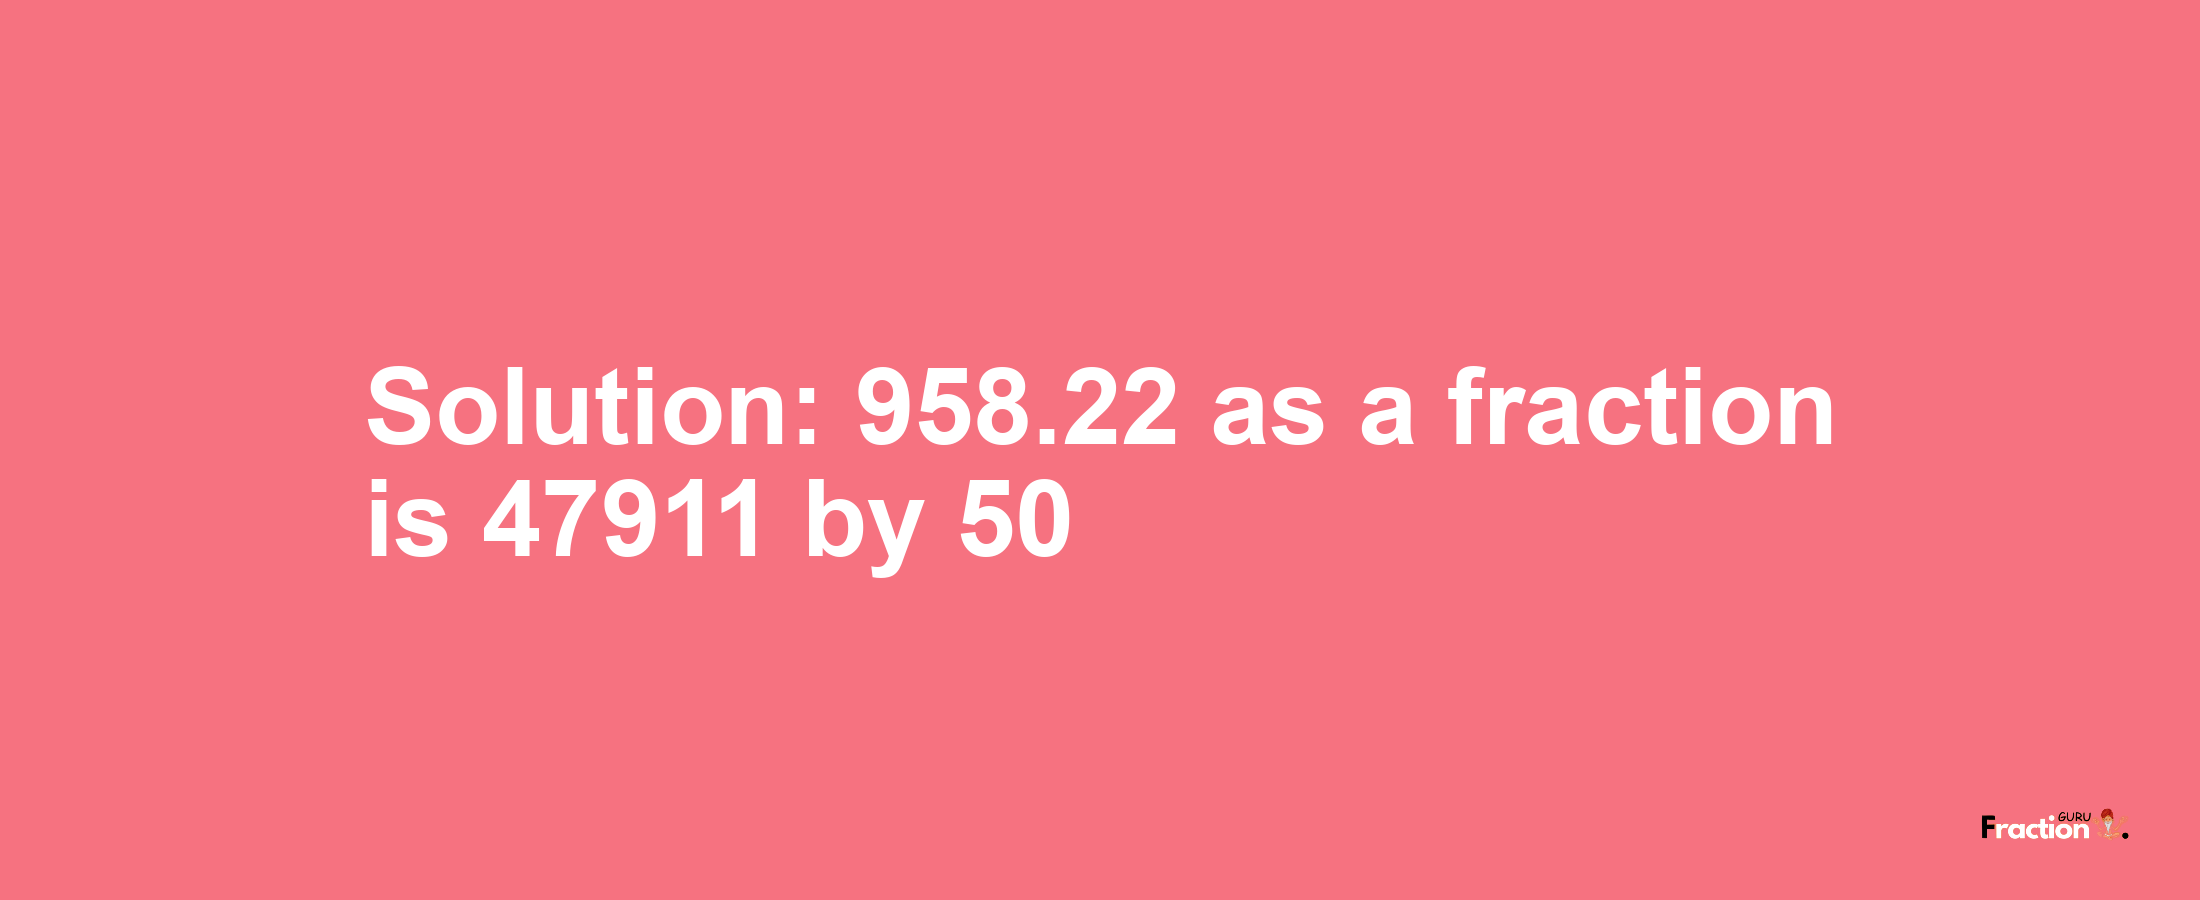 Solution:958.22 as a fraction is 47911/50